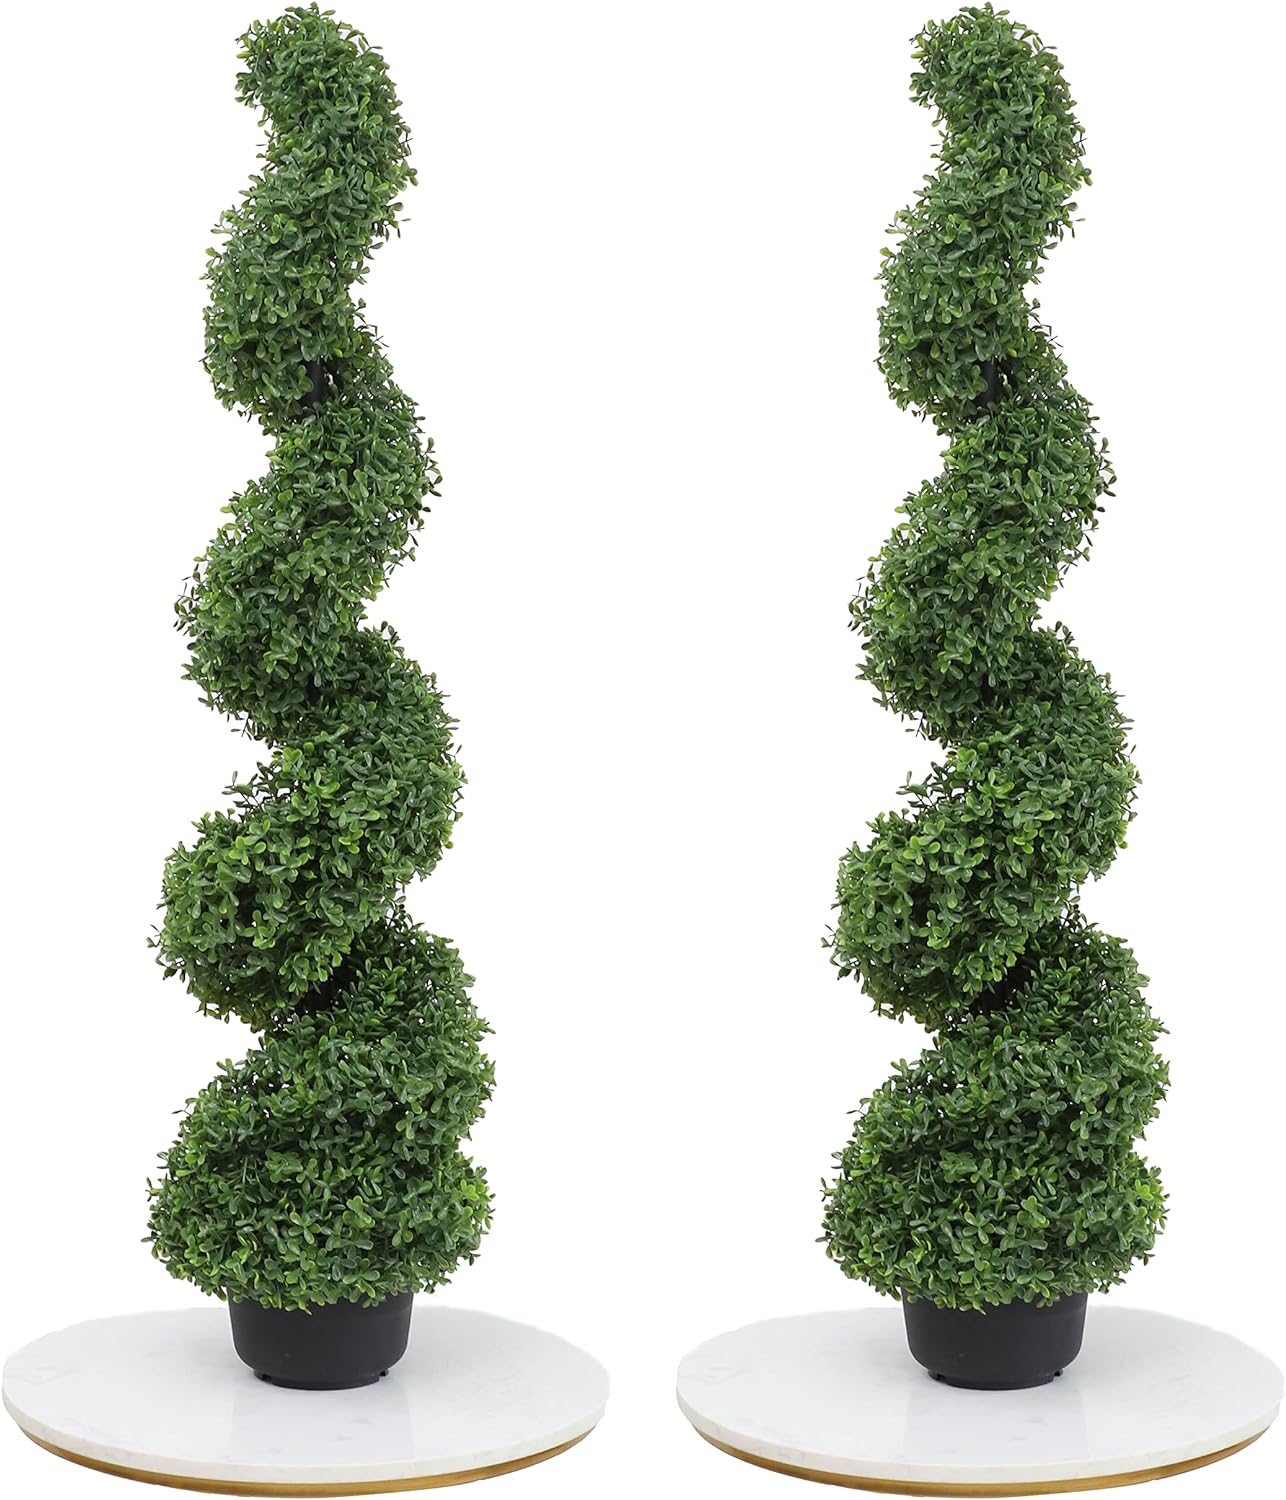 35 Inch Artificial Boxwood Topiary Tree Spiral Plants Fake Faux Plant Decor in Plastic Pot Green Indoor or Outdoor, Set of 2